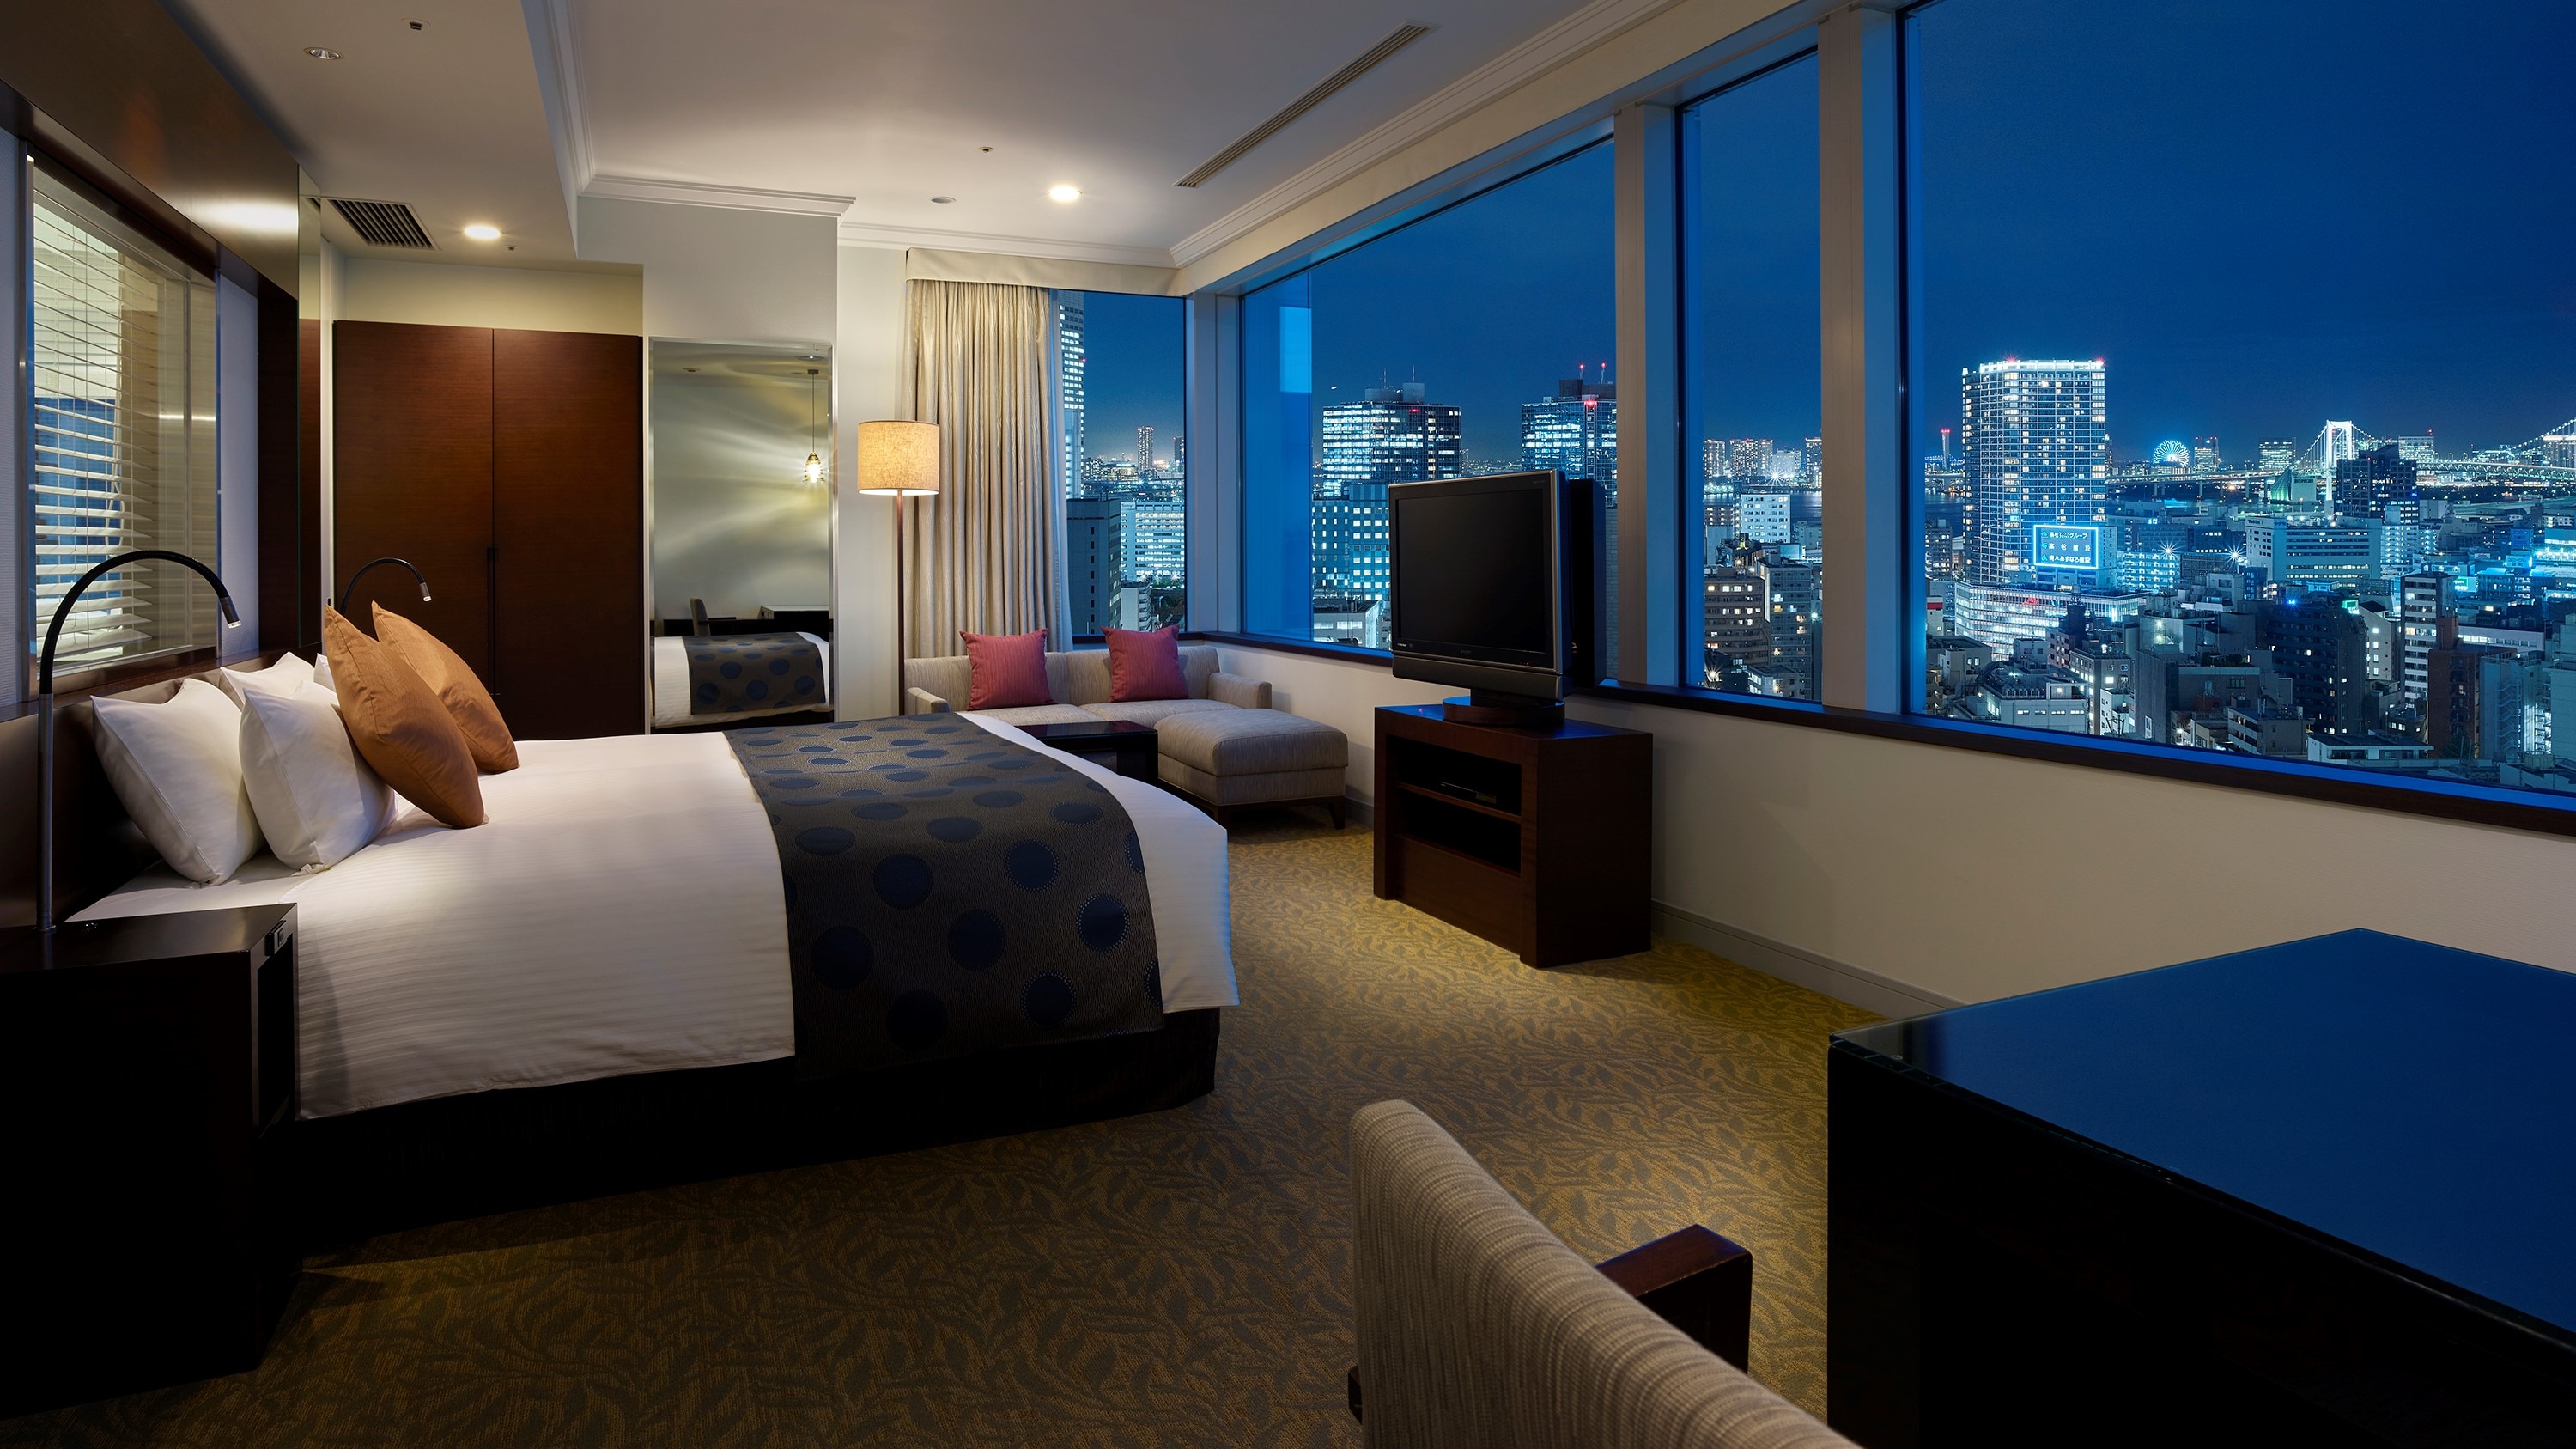 [Executive Corner King] Enjoy the openness of the corner room and the view of the city from the two windows.